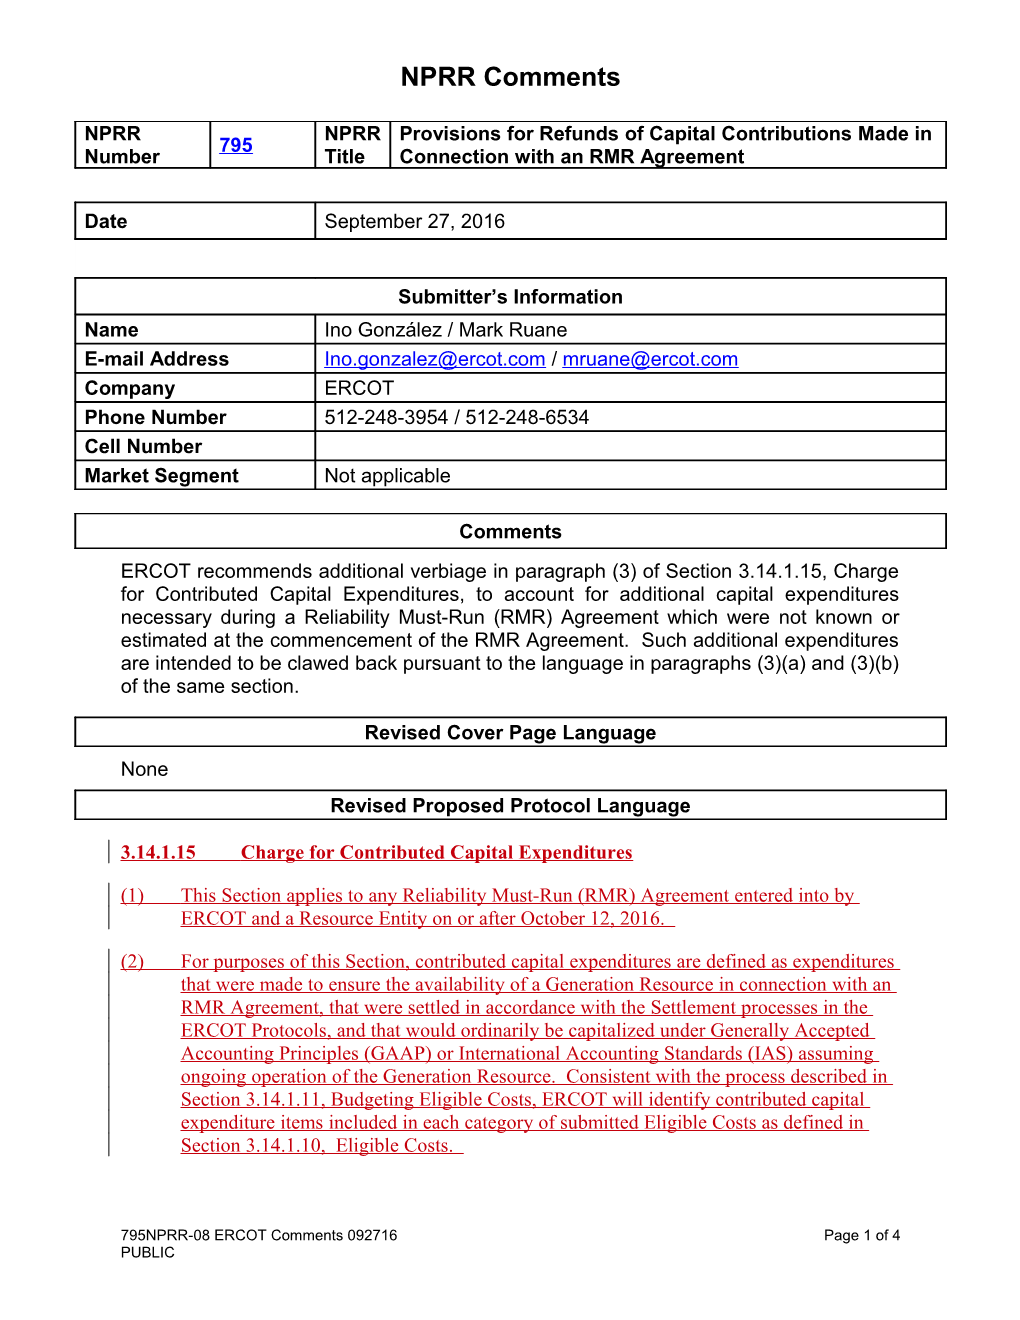 3.14.1. 15Charge for Contributed Capital Expenditures